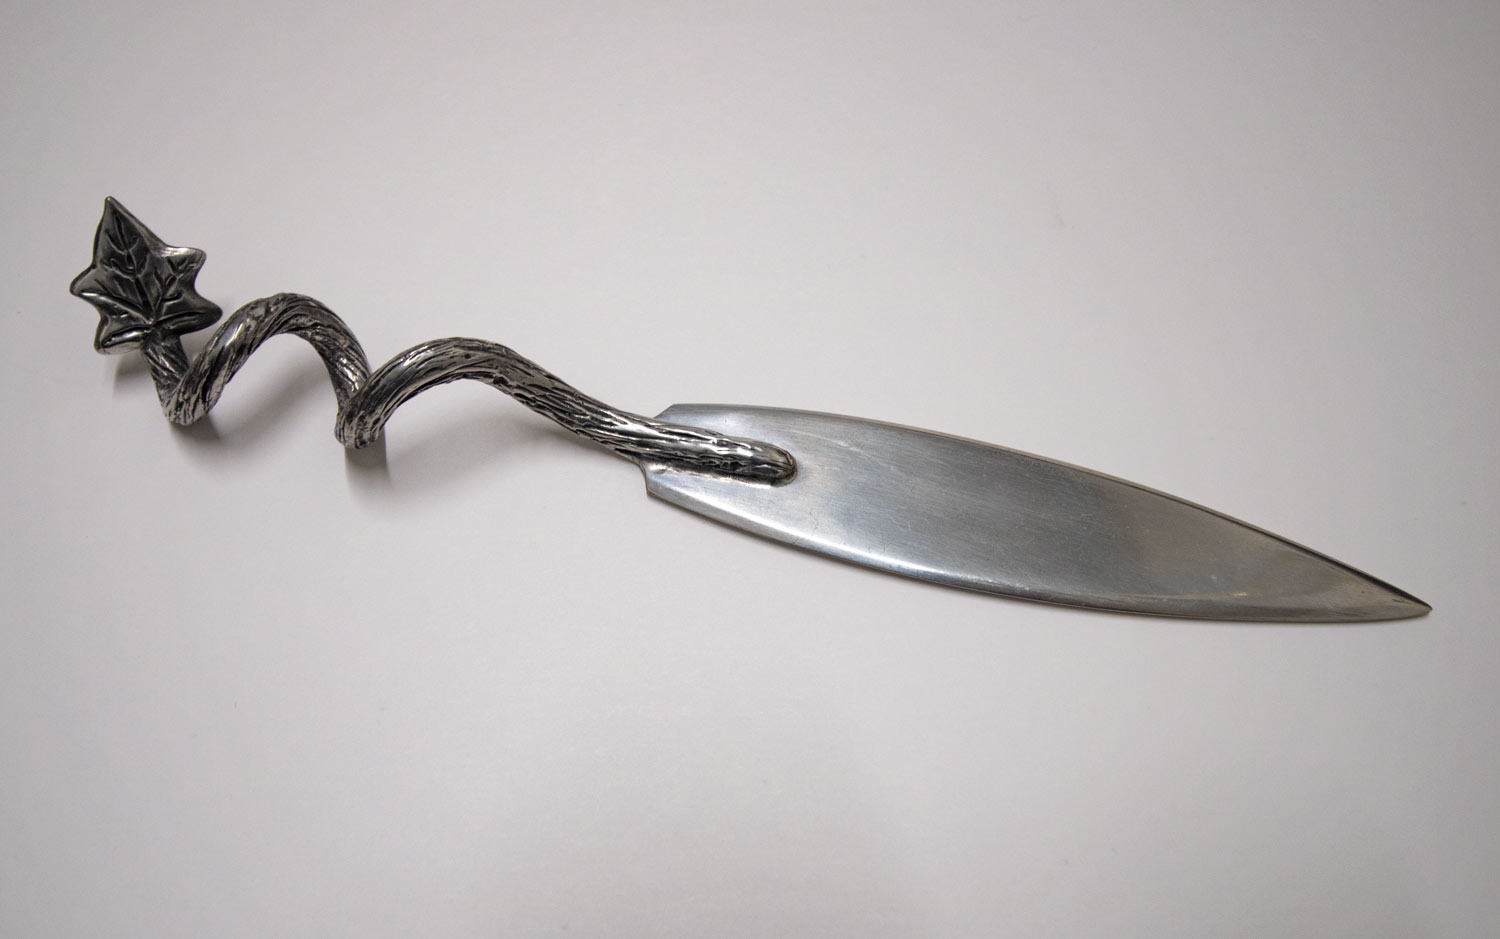 Curled Ivy Letter Opener by Charles H. Reinike III